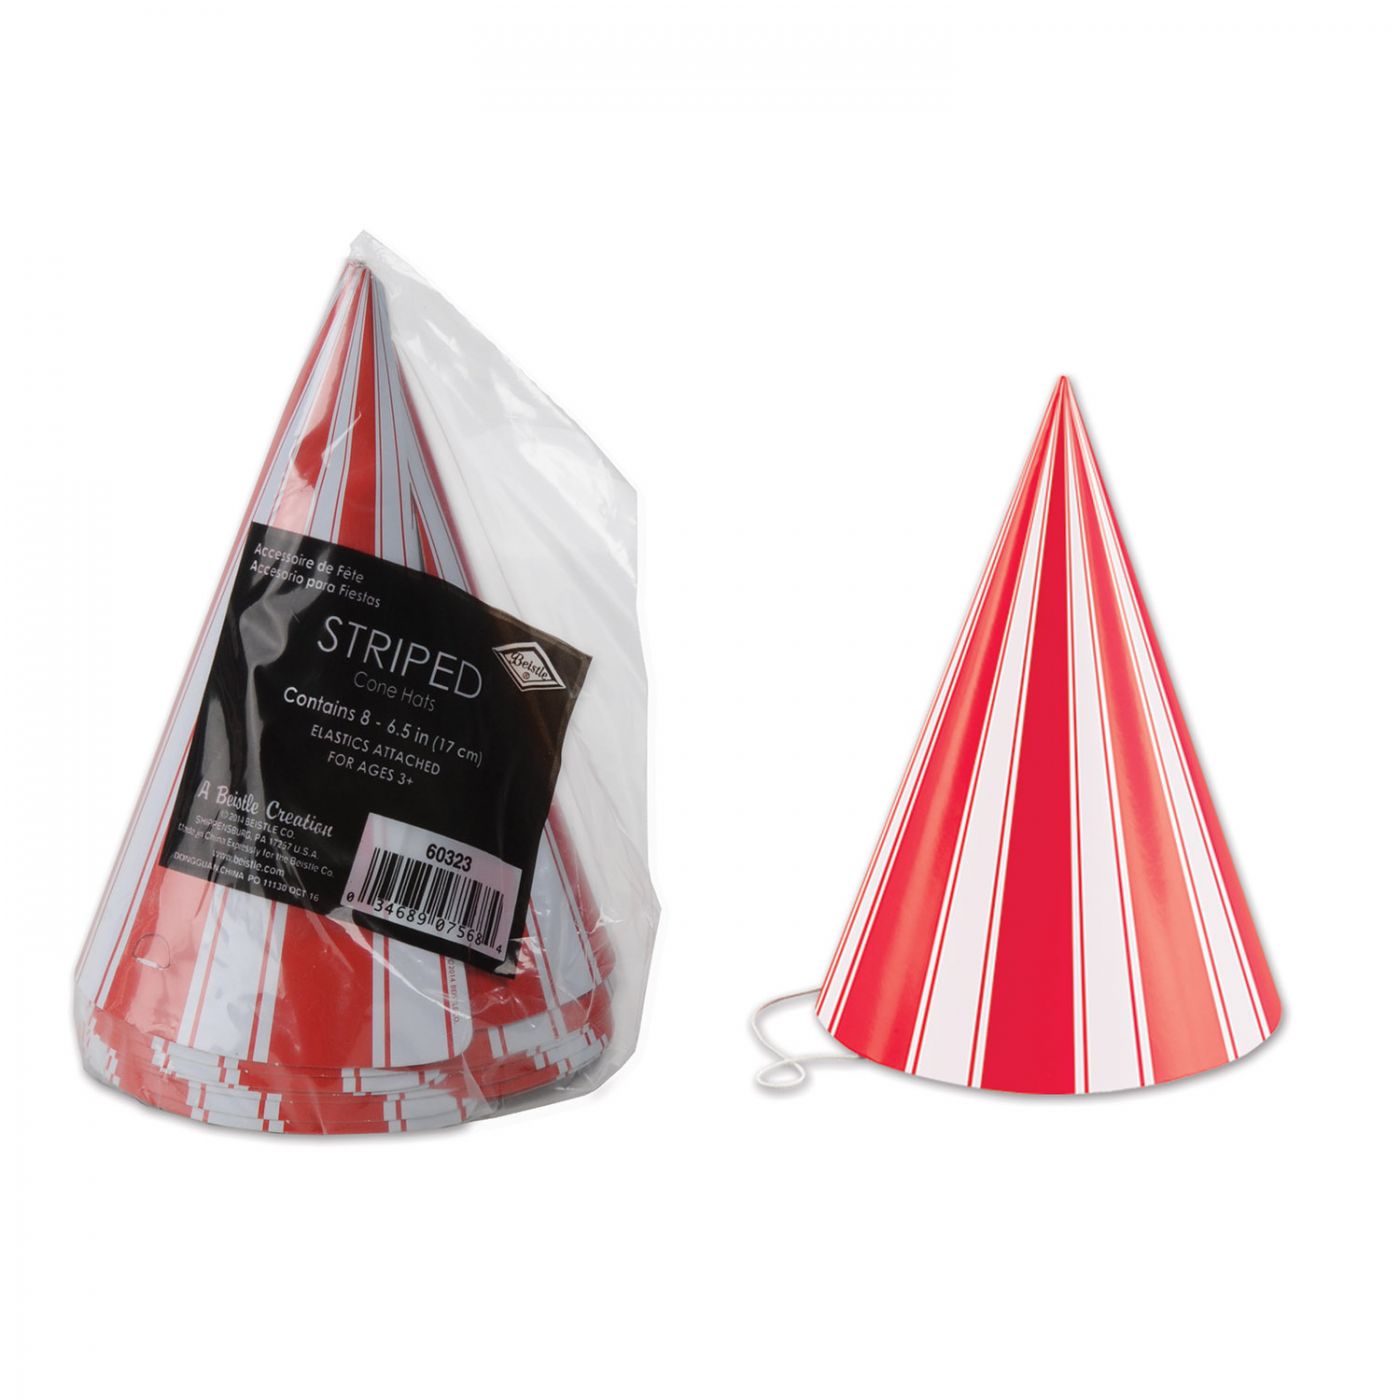 Pkgd Striped Cone Hats image